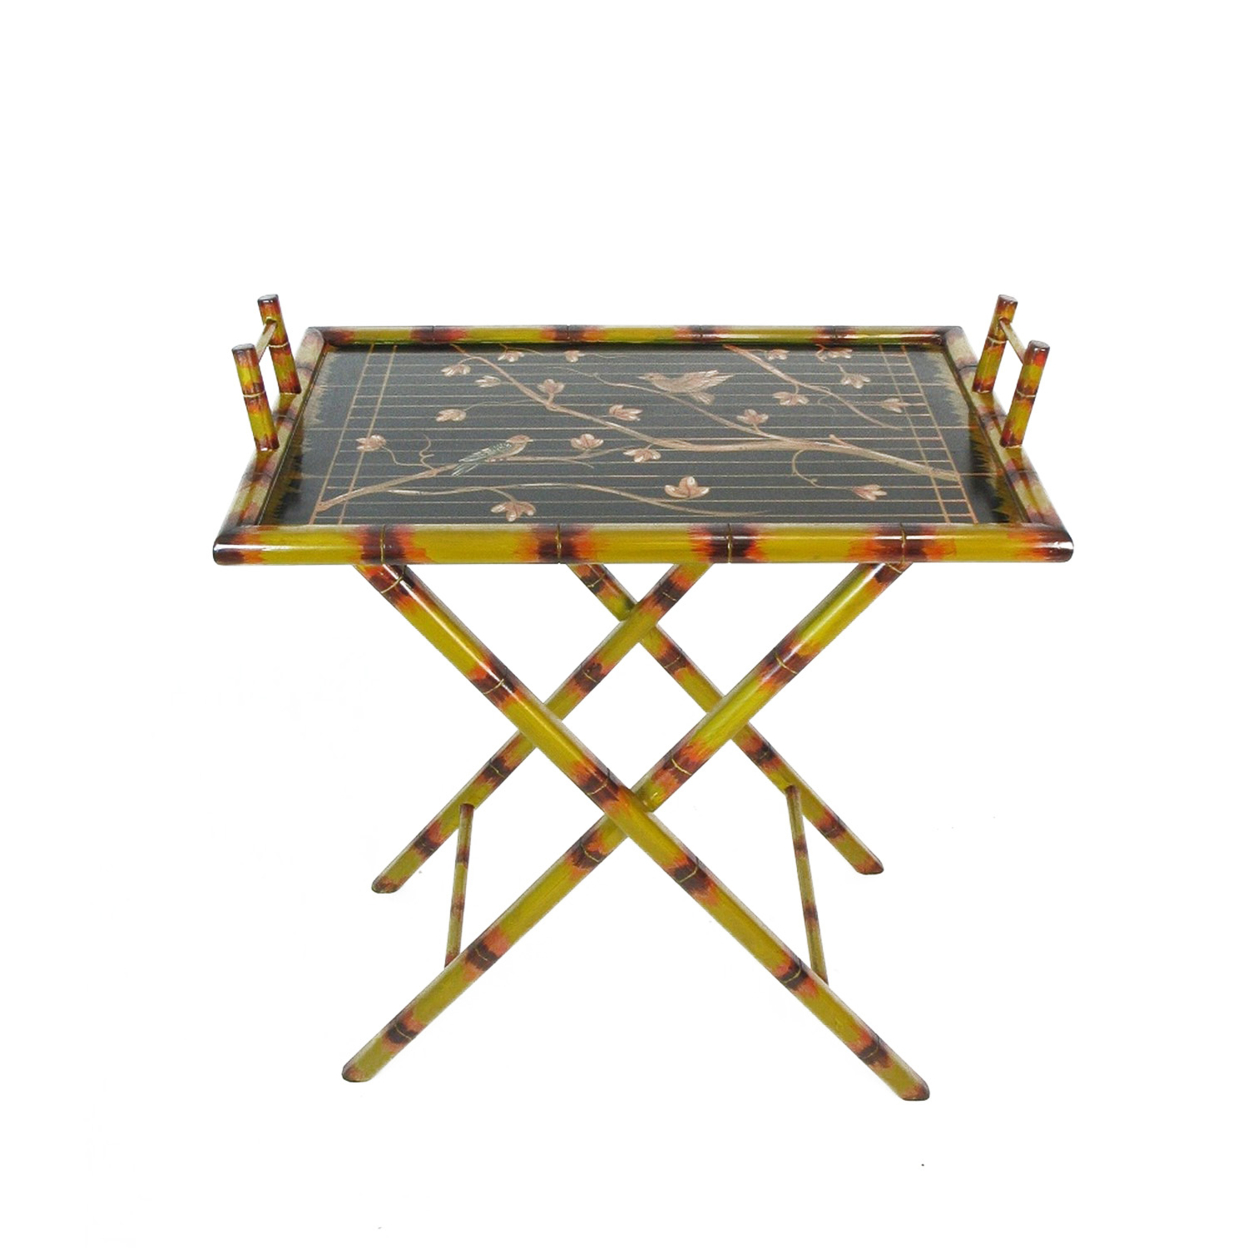 Wooden Folding Stand With Tray Top And Floral Print, Yellow- Saltoro Sherpi